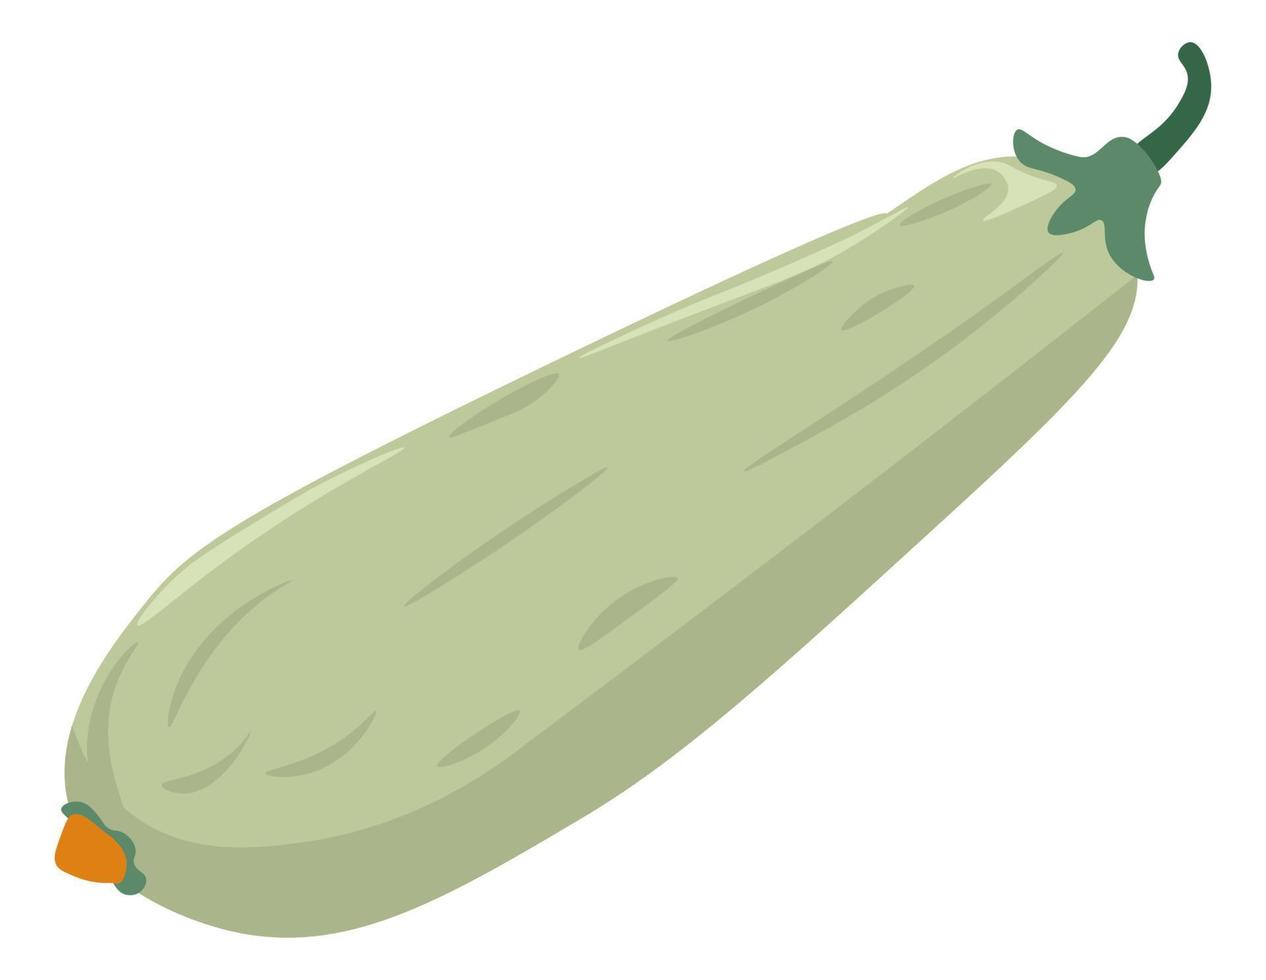 Zucchini vegetable, organic and natural product vector